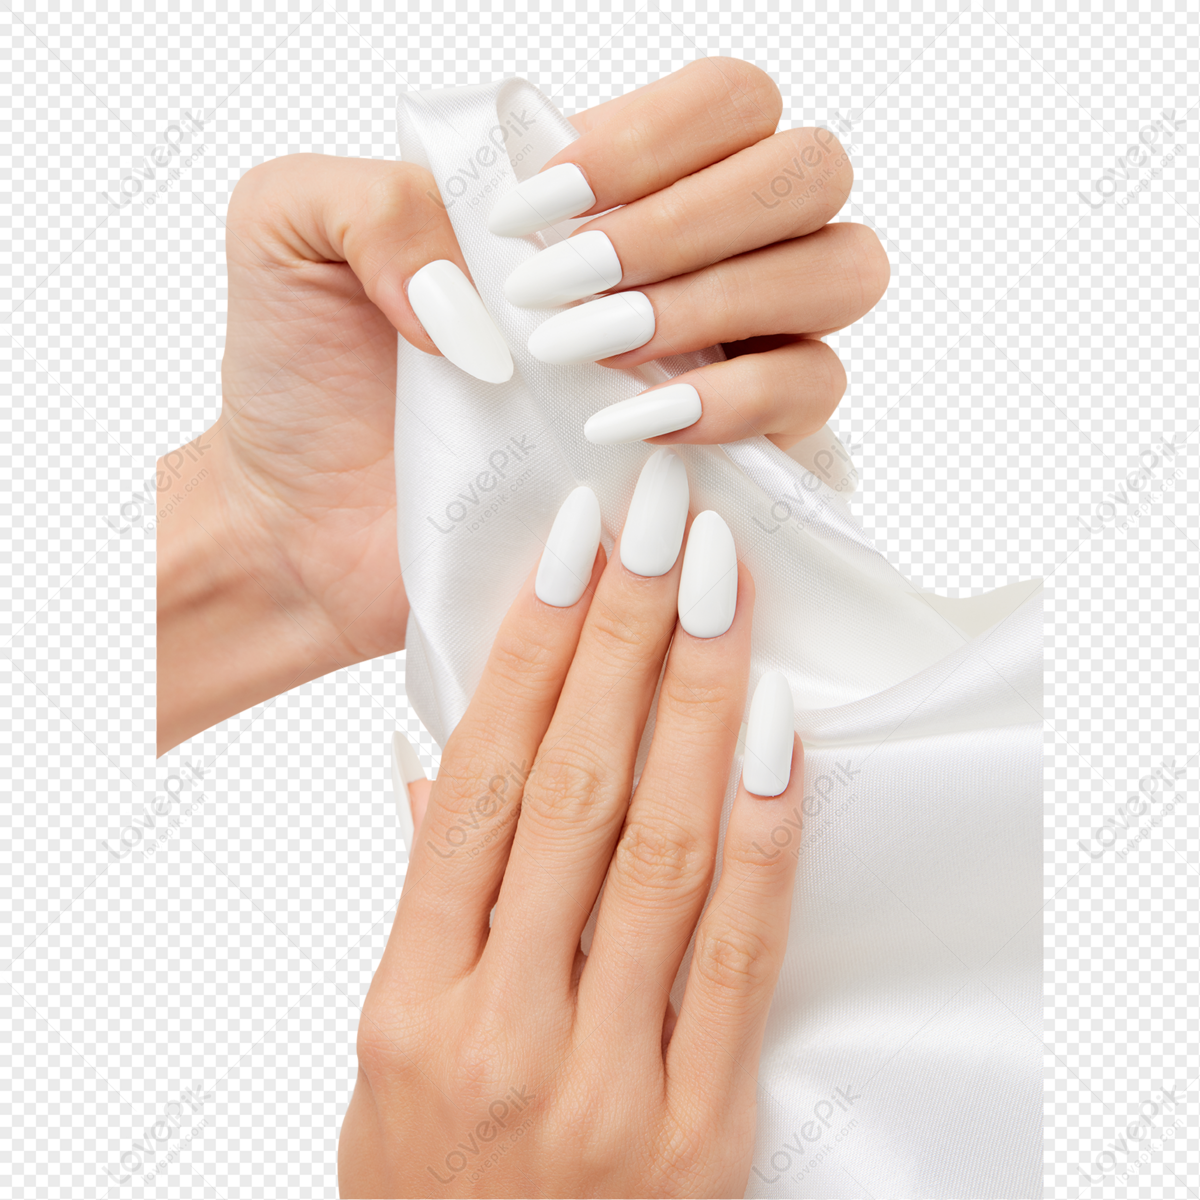 Fashionalble Acrylic Nails Png Free Download, Transparent Png - kindpng